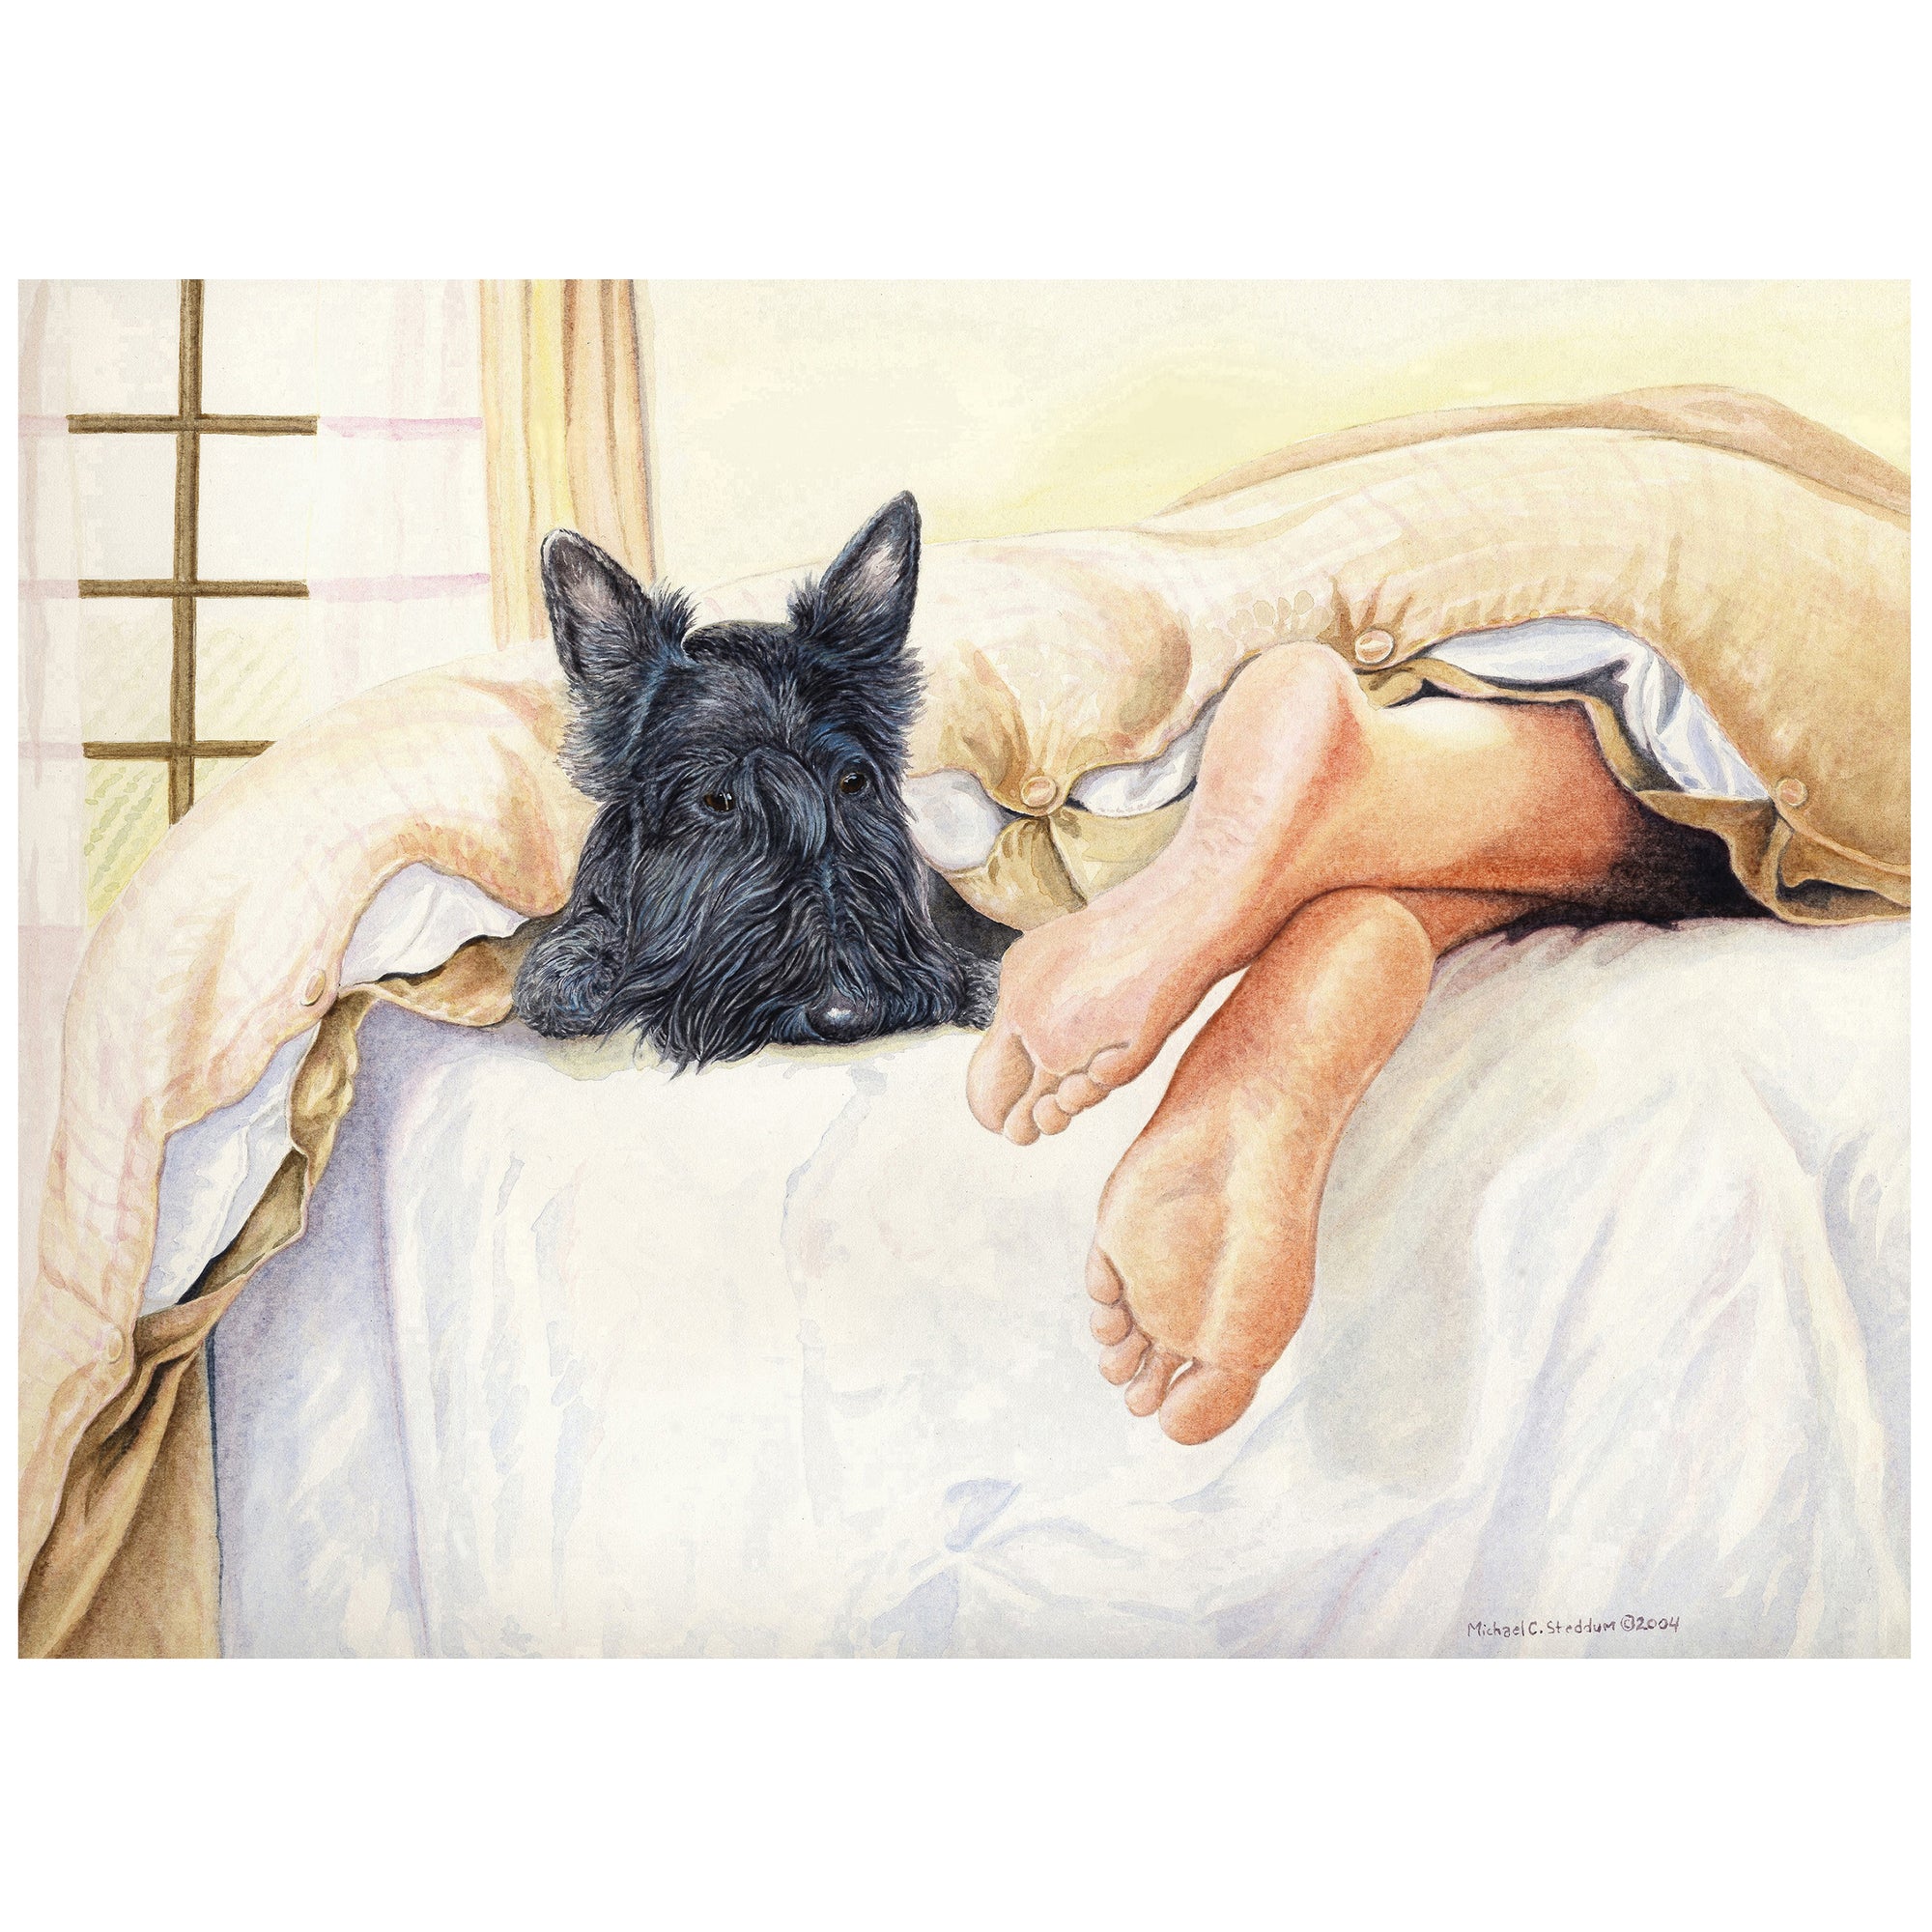 Scottish Terrier Art Reproduction Print – "Scottie Feet" by Michael Steddum - Limited Edition Signed and Numbered Scottish Terrier Art Print